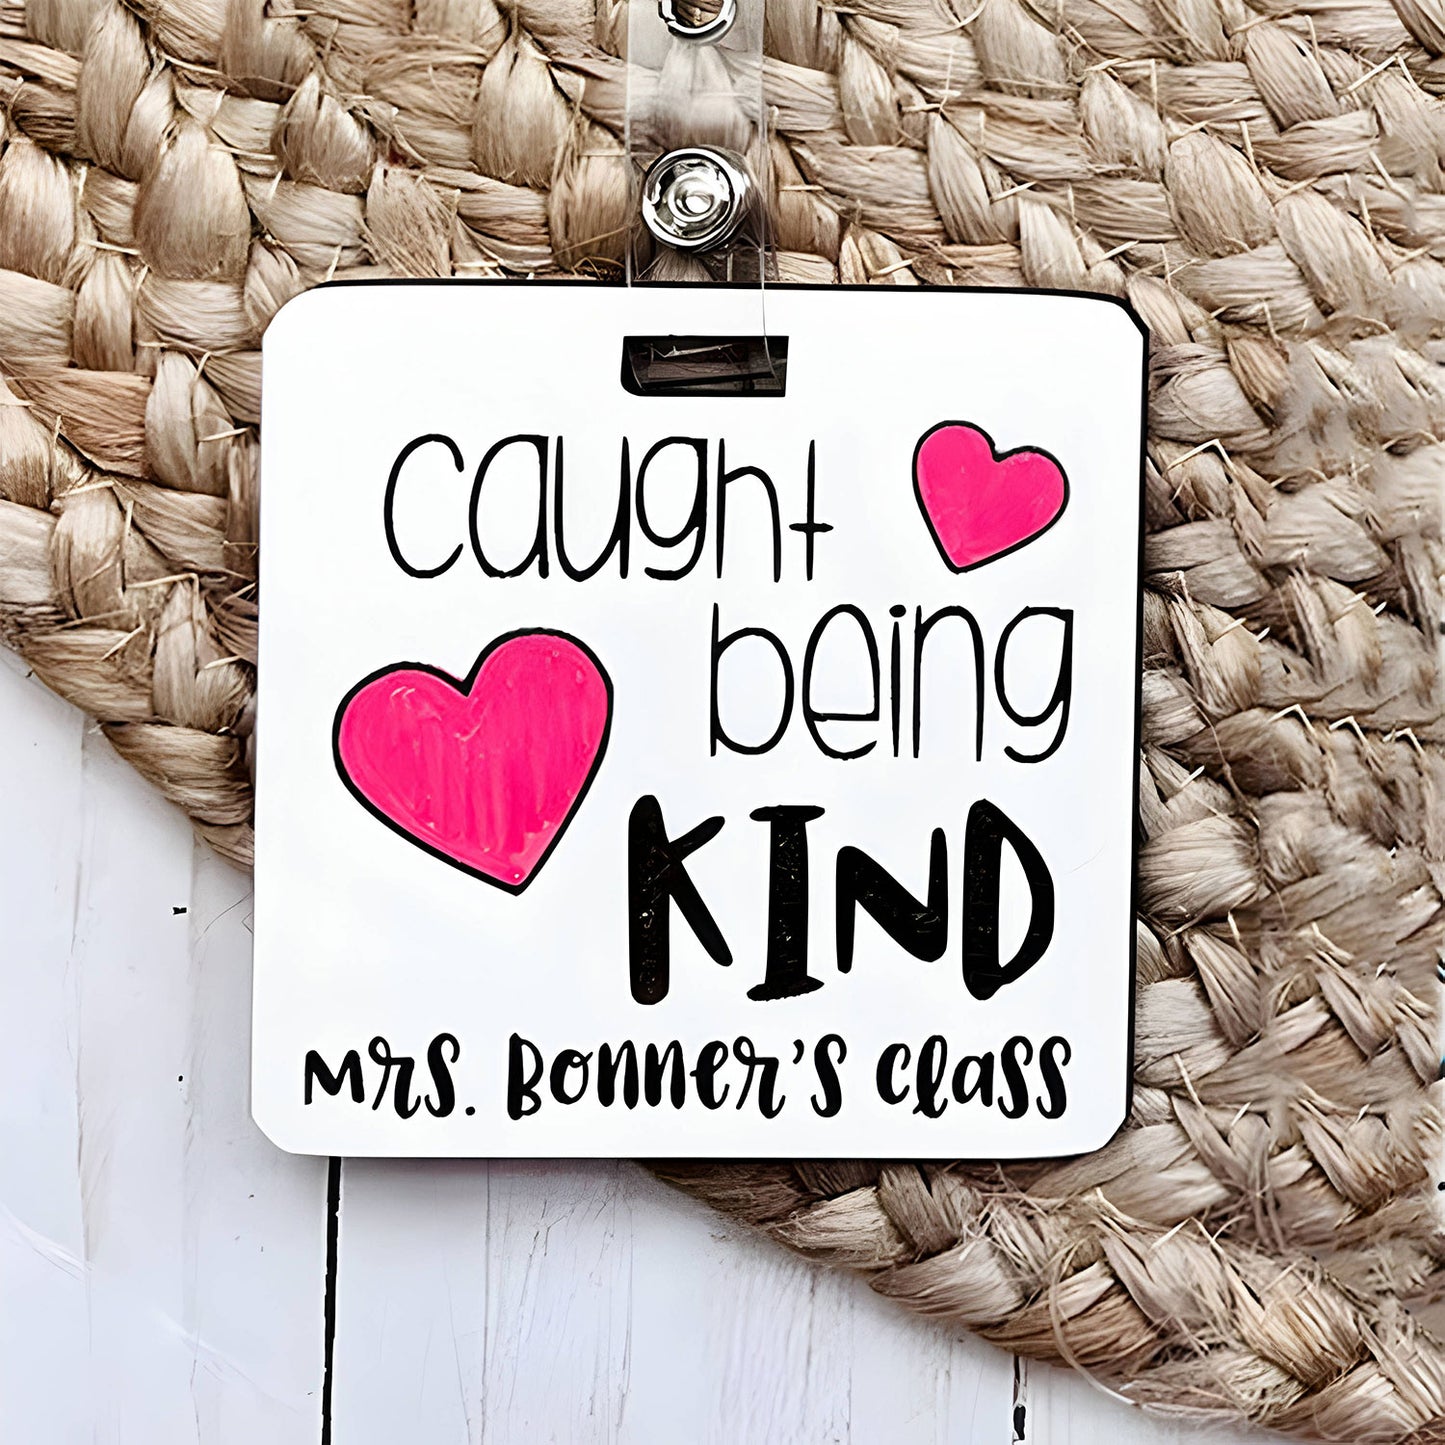 Personalized School Hall Pass - "Caught Being Kind"